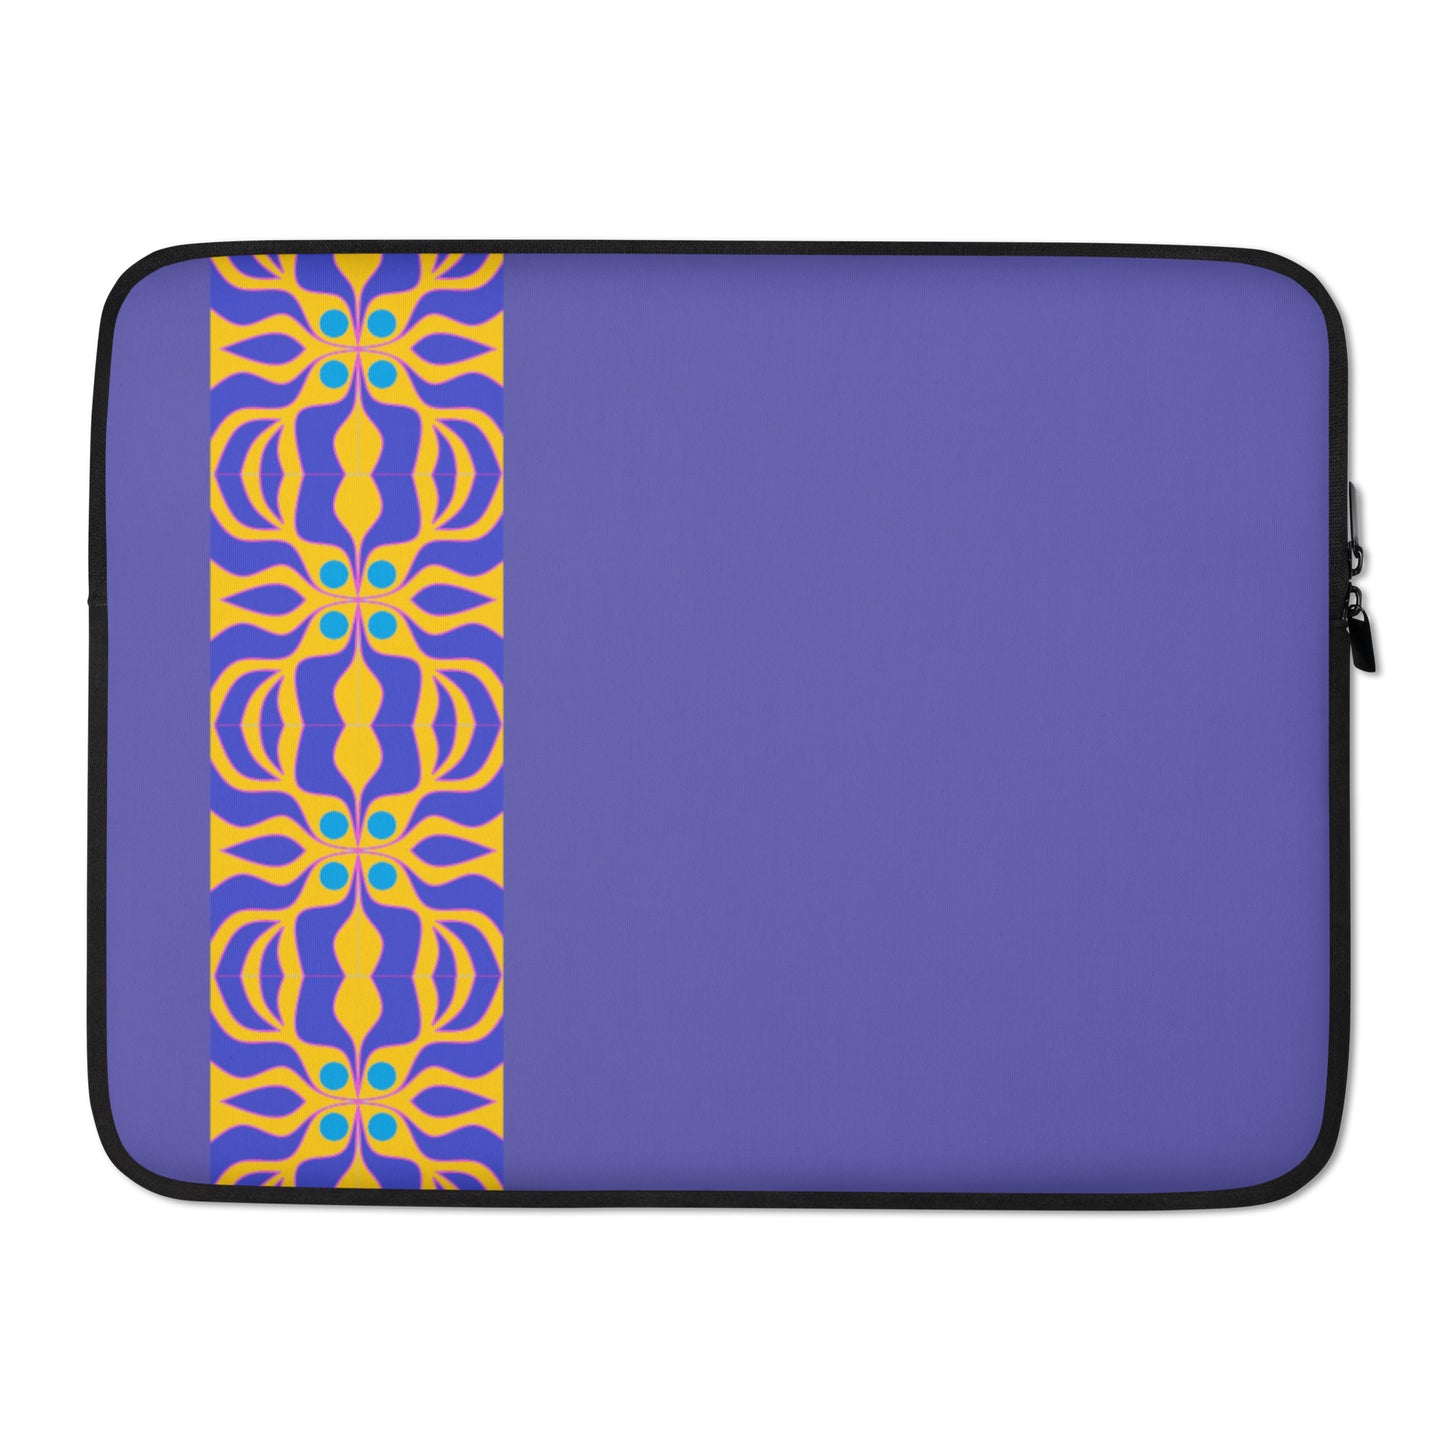 Laptop Sleeve with purple and yellow print